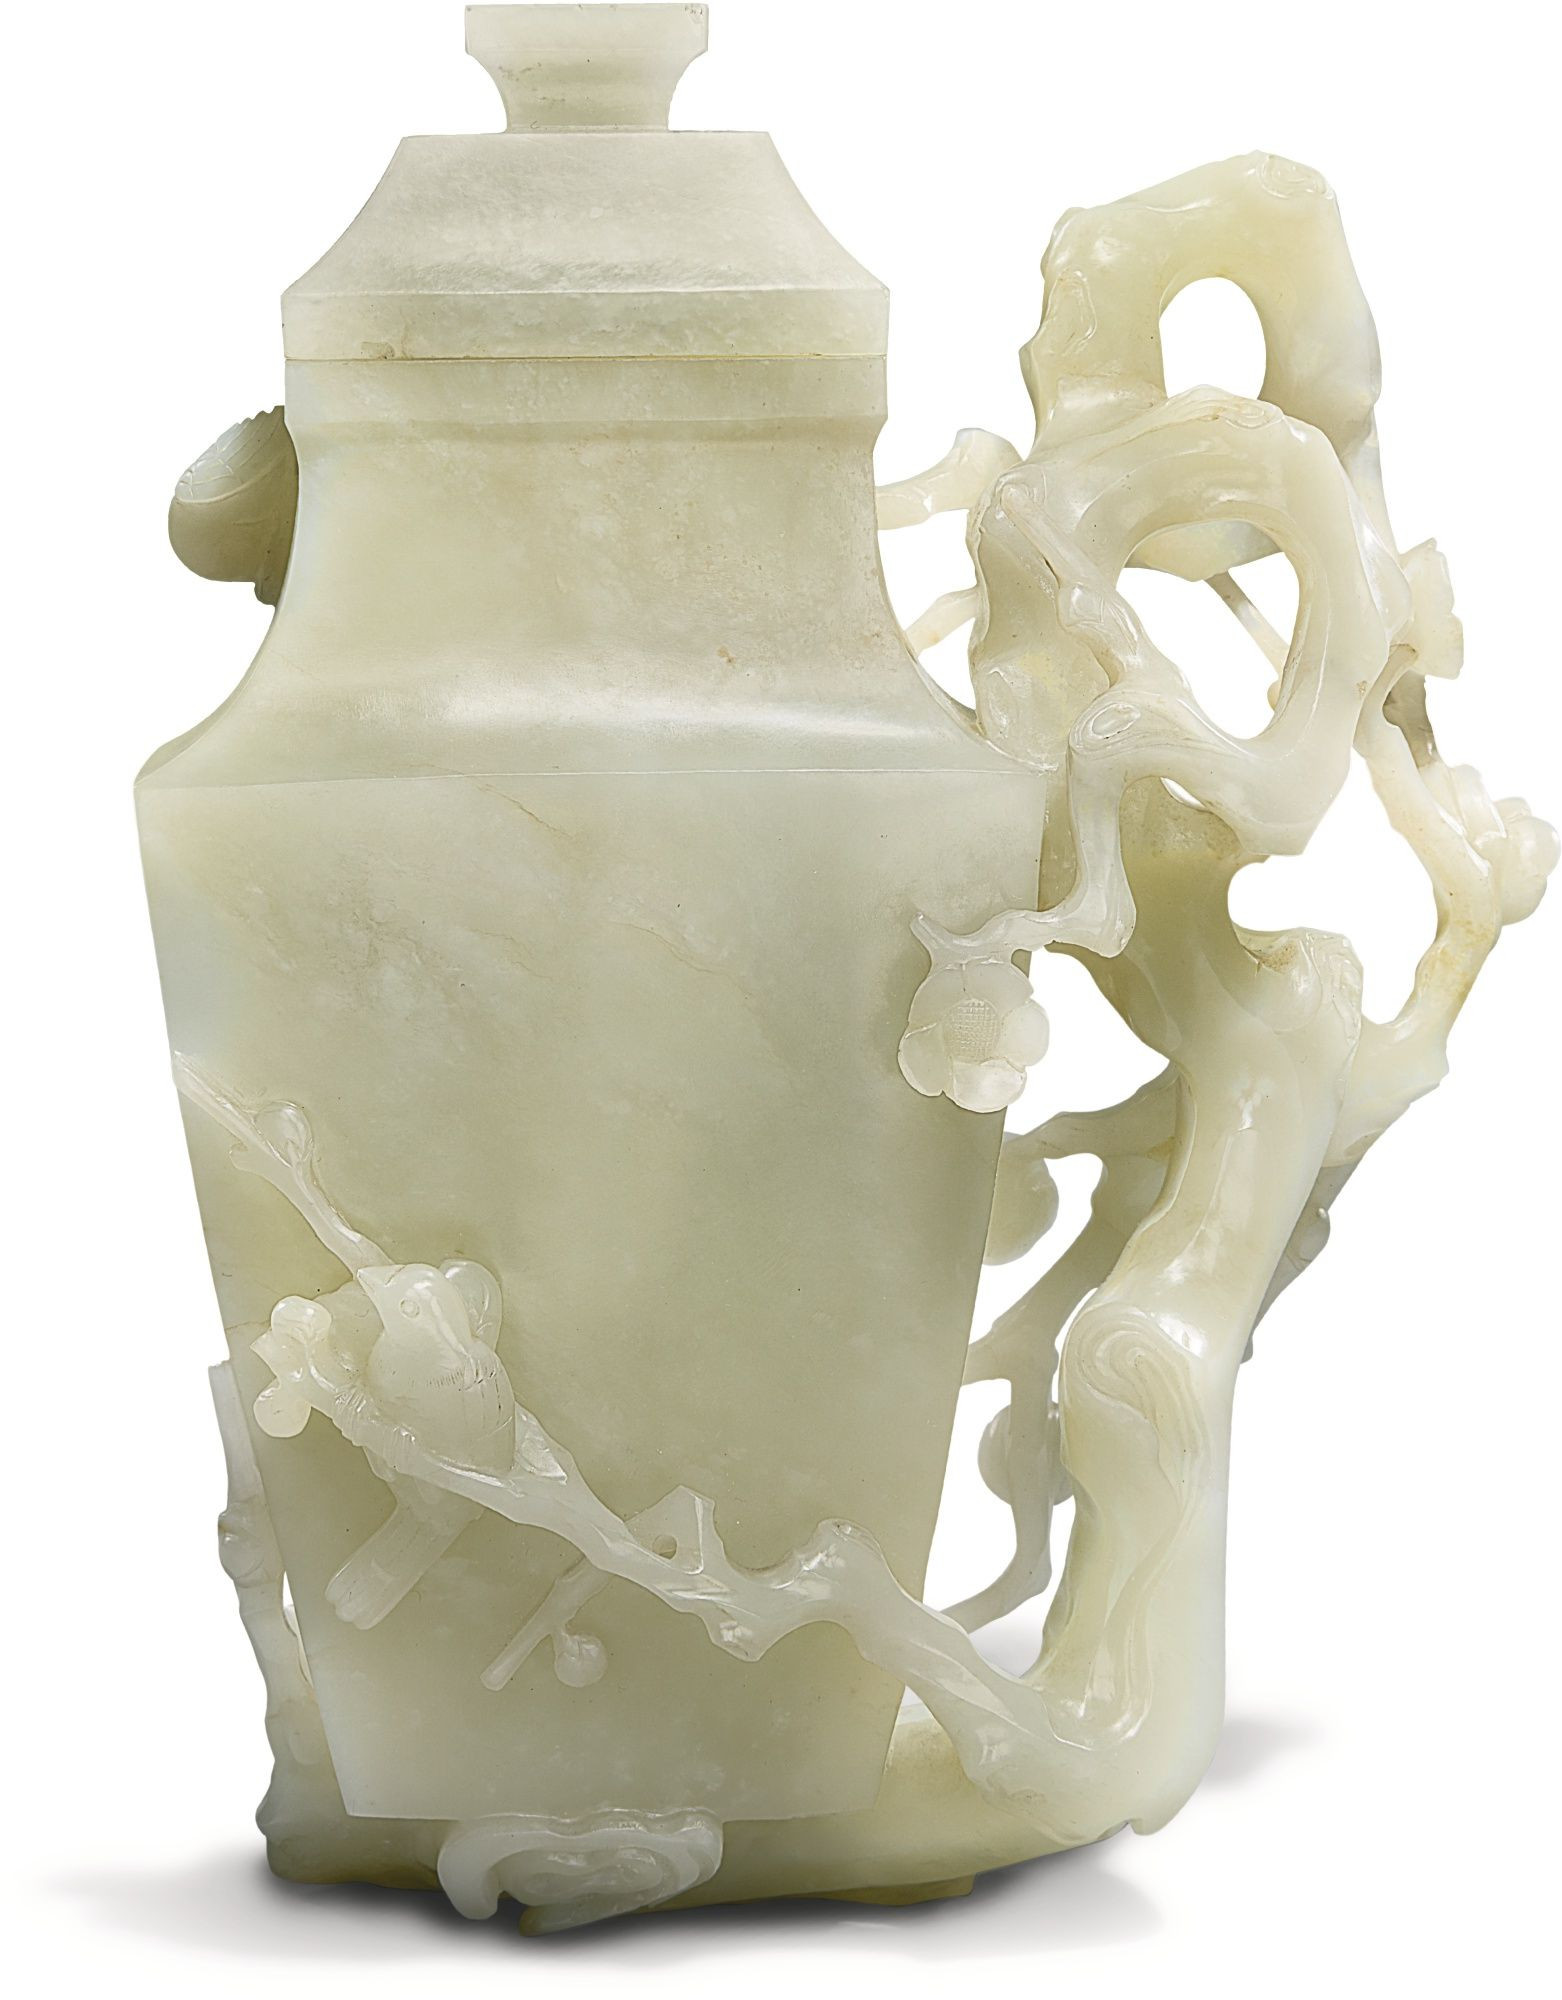 27 Recommended Chinese Meiping Vase 2024 free download chinese meiping vase of a pale celadon jade bird and prunus vase and cover qing dynasty inside a pale celadon jade bird and prunus vase and cover qing dynasty qianlong period